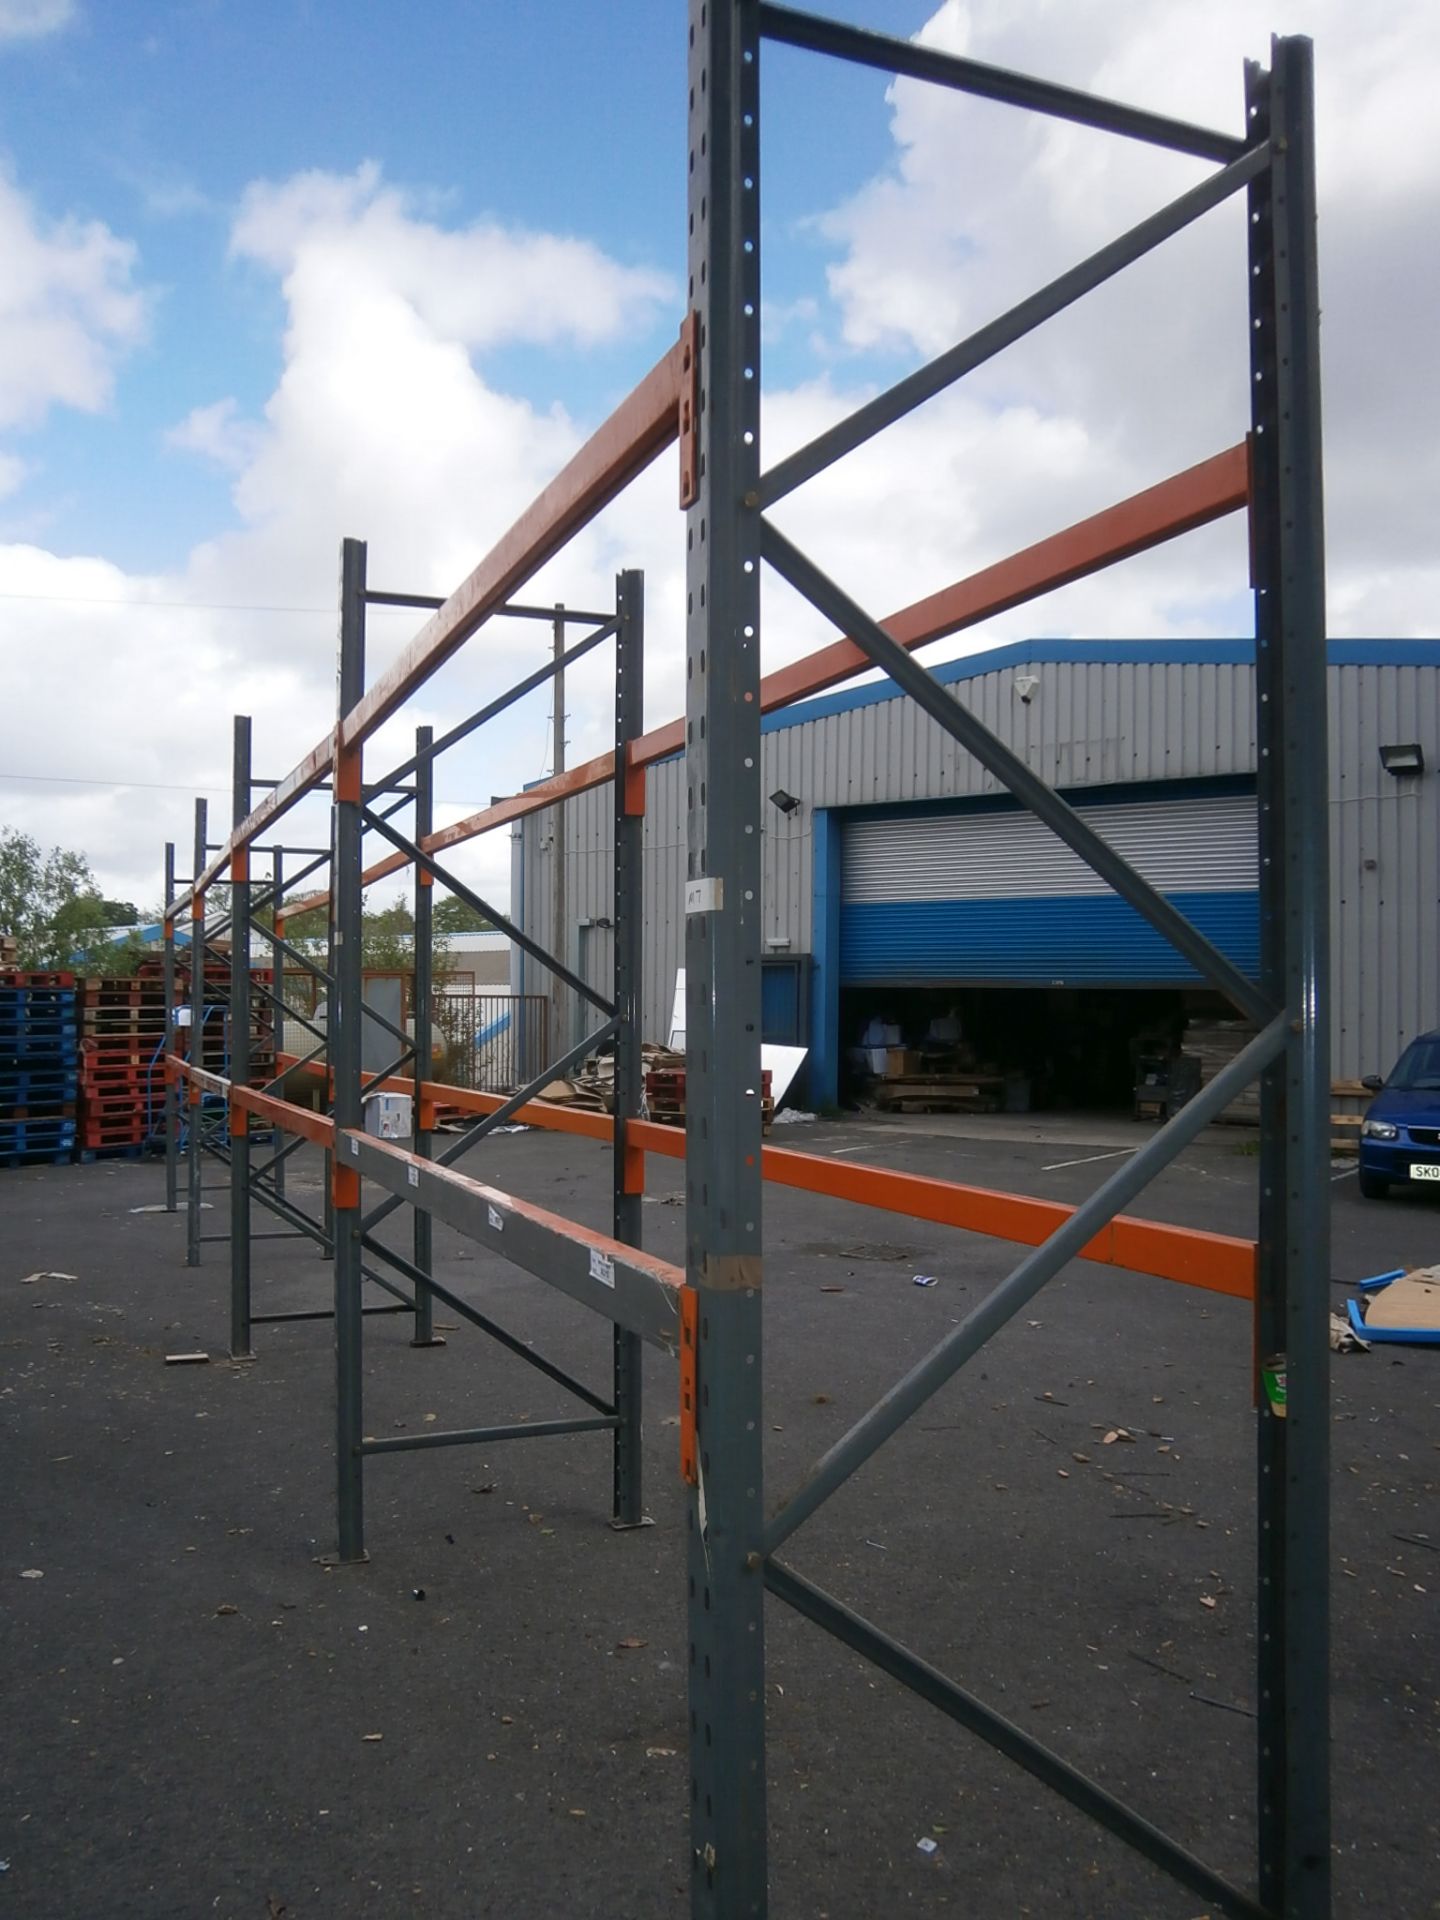 4 x Bays of Commercial Racking - Includes 5 x Uprights, 16 x Beams (Approx Per Bay H - 2900mm, D - 9 - Image 3 of 5